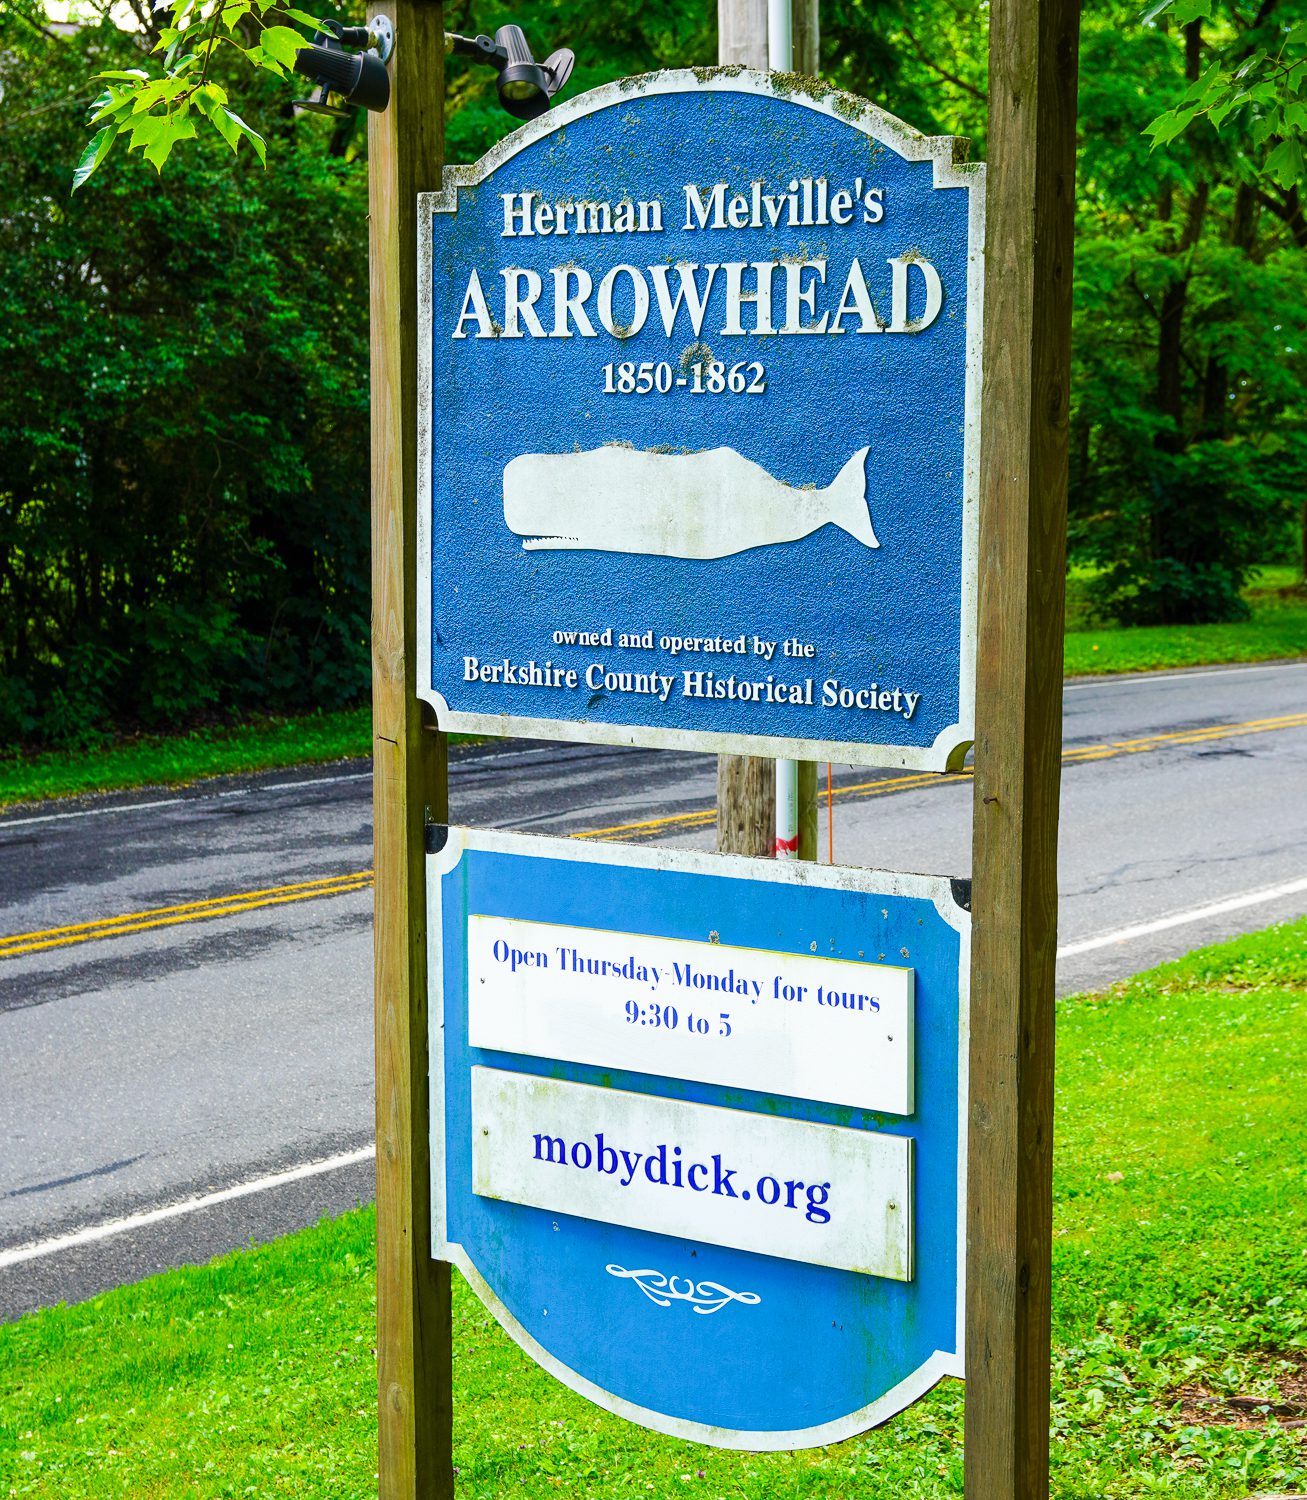 The entrance sign to Herman Melville's Arrowhead.